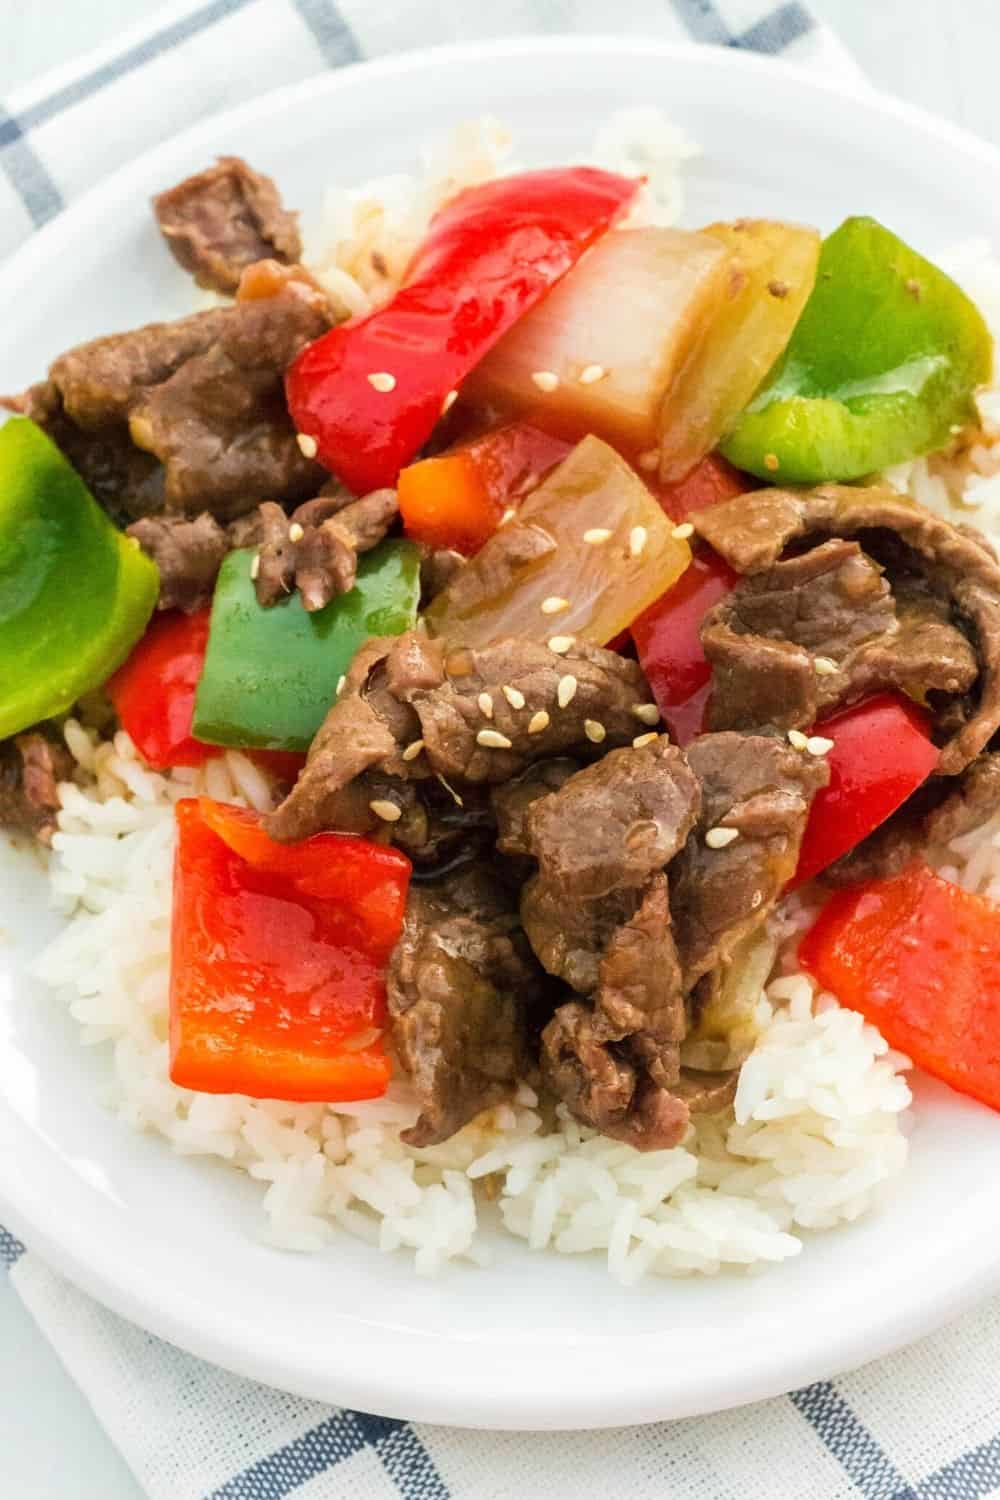 Instant Pot Chinese beef with sauce, along with bell peppers and onions, served over white rice